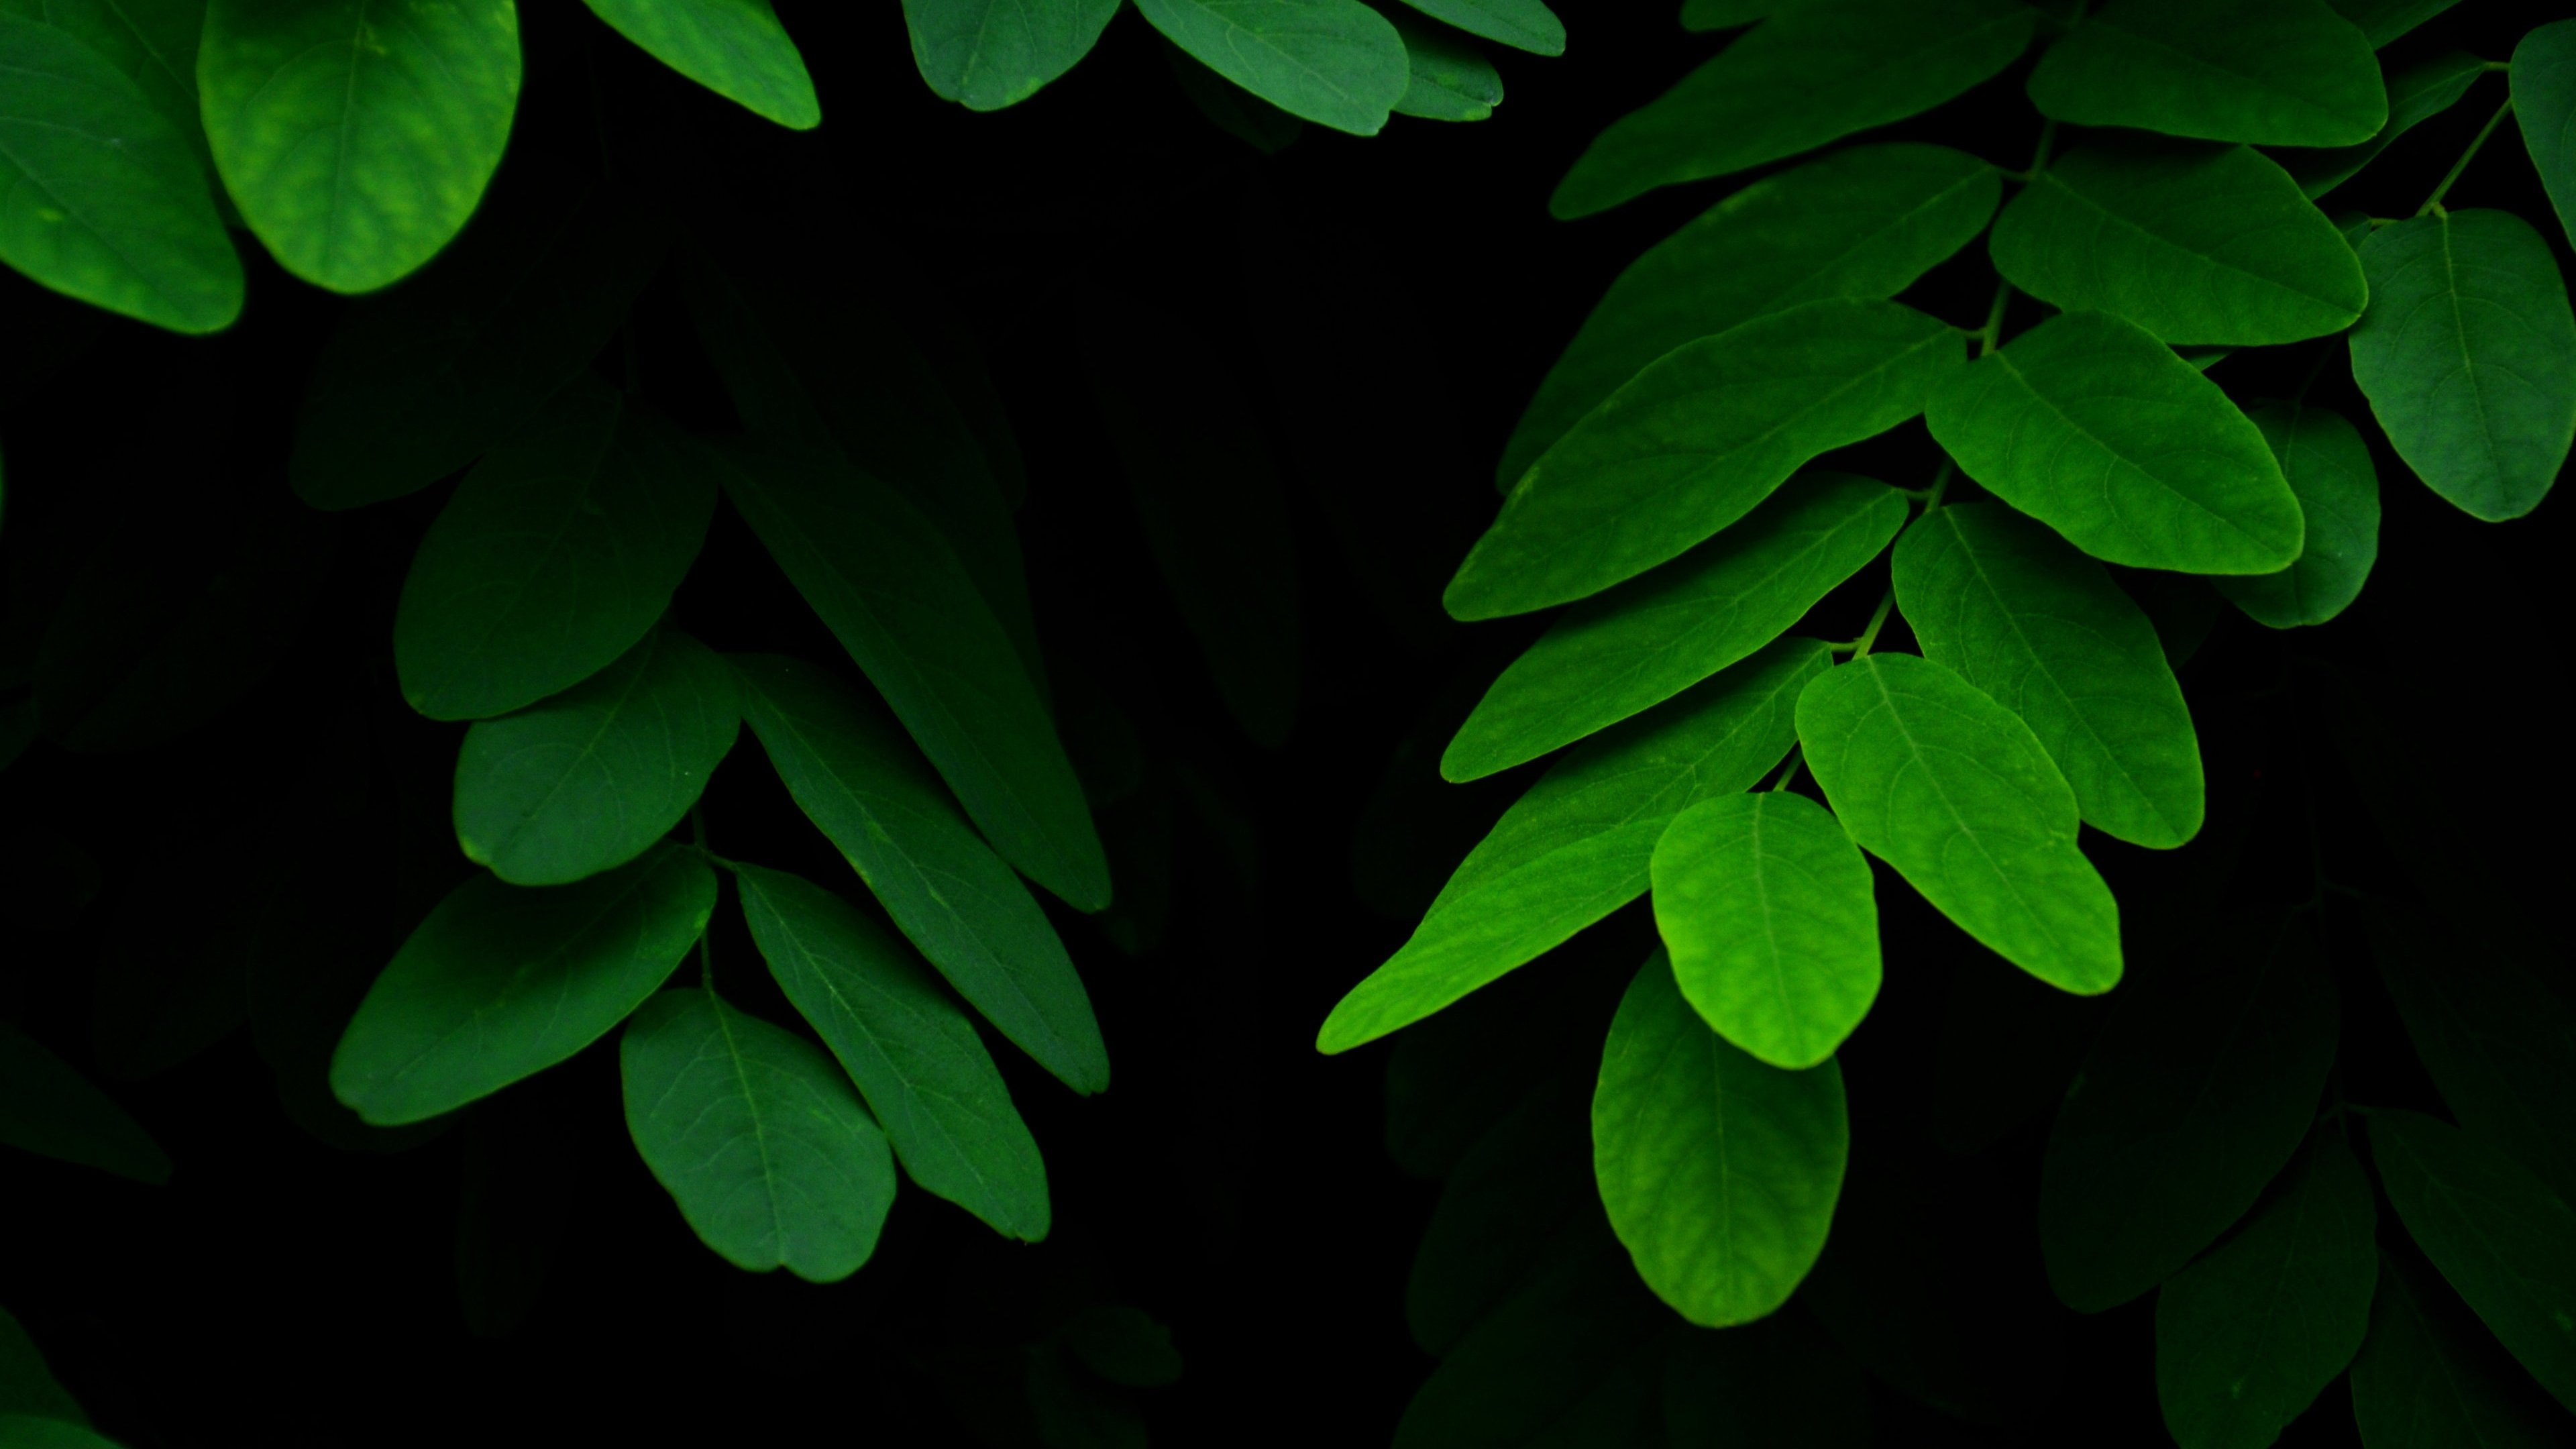 Green Leaf: A tropical plant, Plant life that occurs in climates that are warm year-round. 3840x2160 4K Wallpaper.